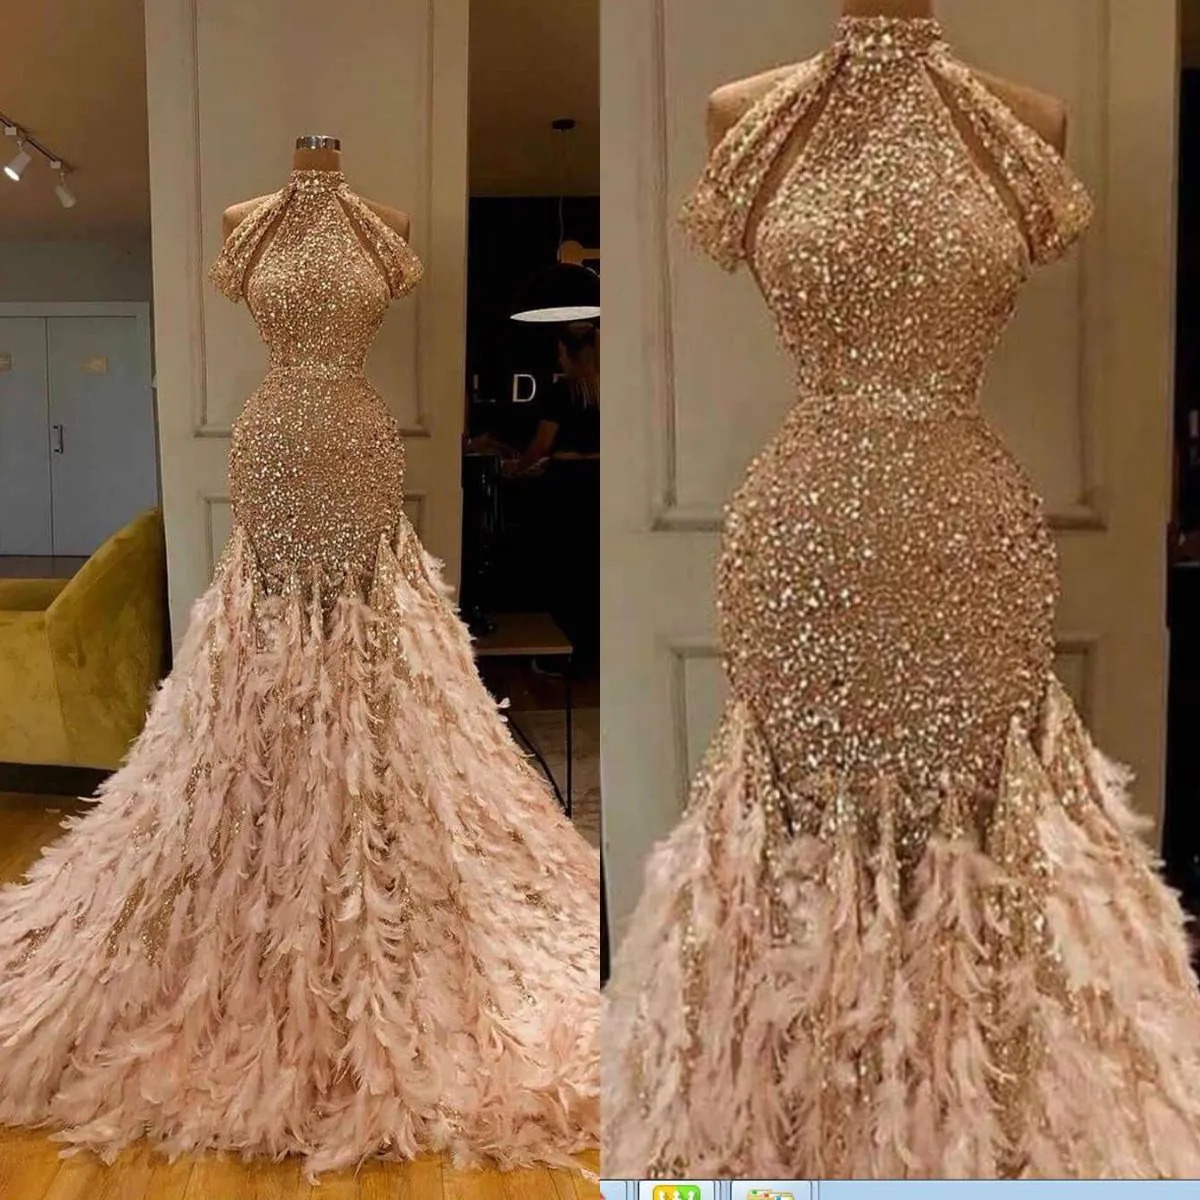 Nyaste Glitter Mermaid Evening Dresses Champagne Fjäder Sequins High Neck Lace Formell Party Gowns Custom Made Long Prom Dresses